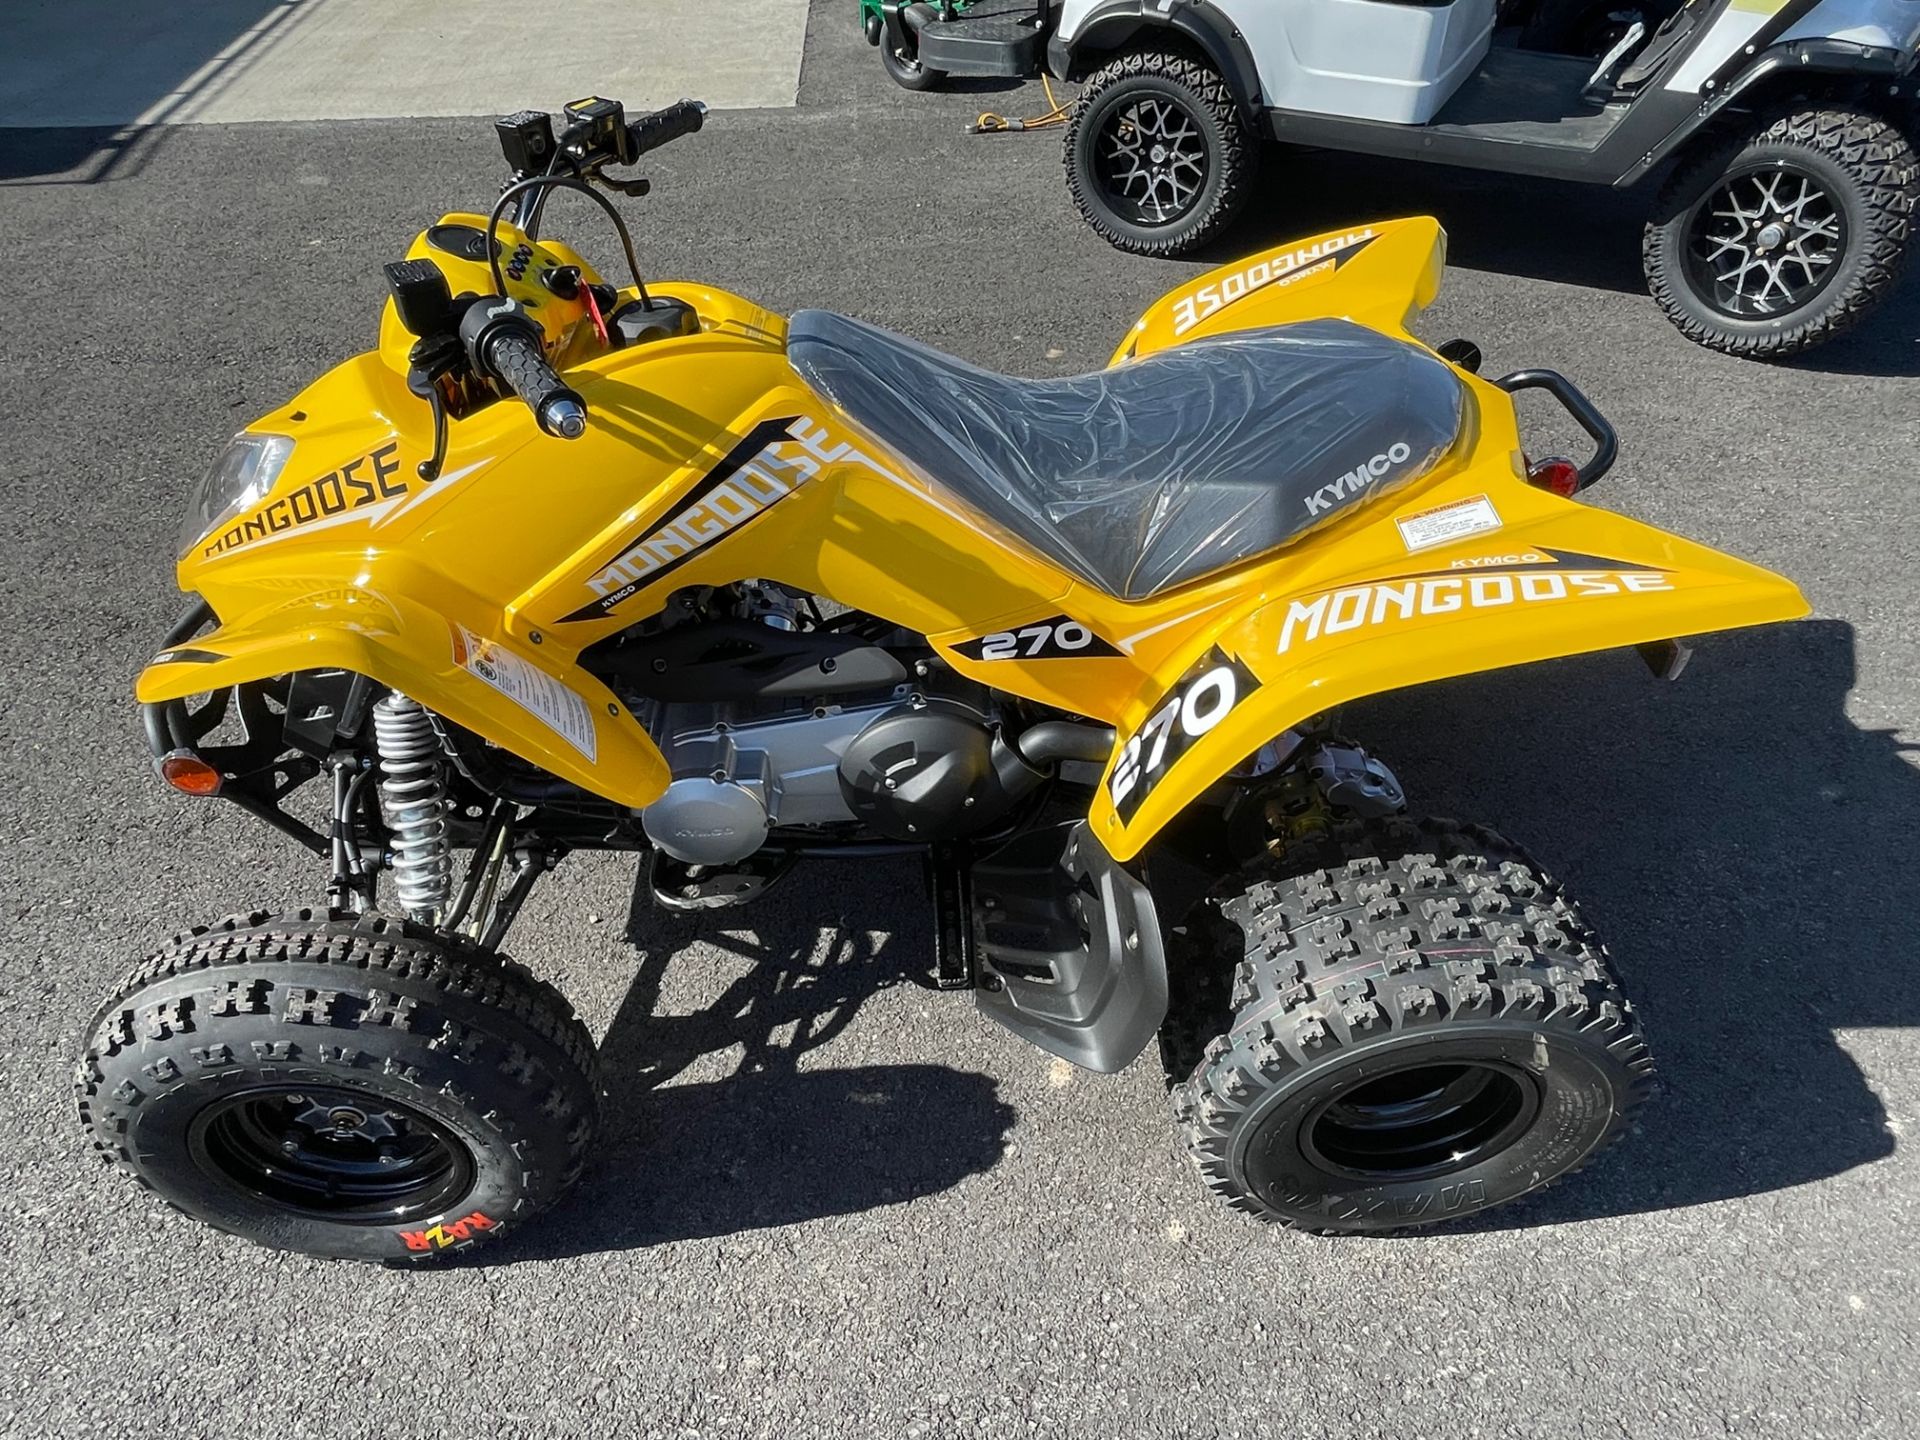 2021 Kymco Mongoose 270 in South Wales, New York - Photo 1